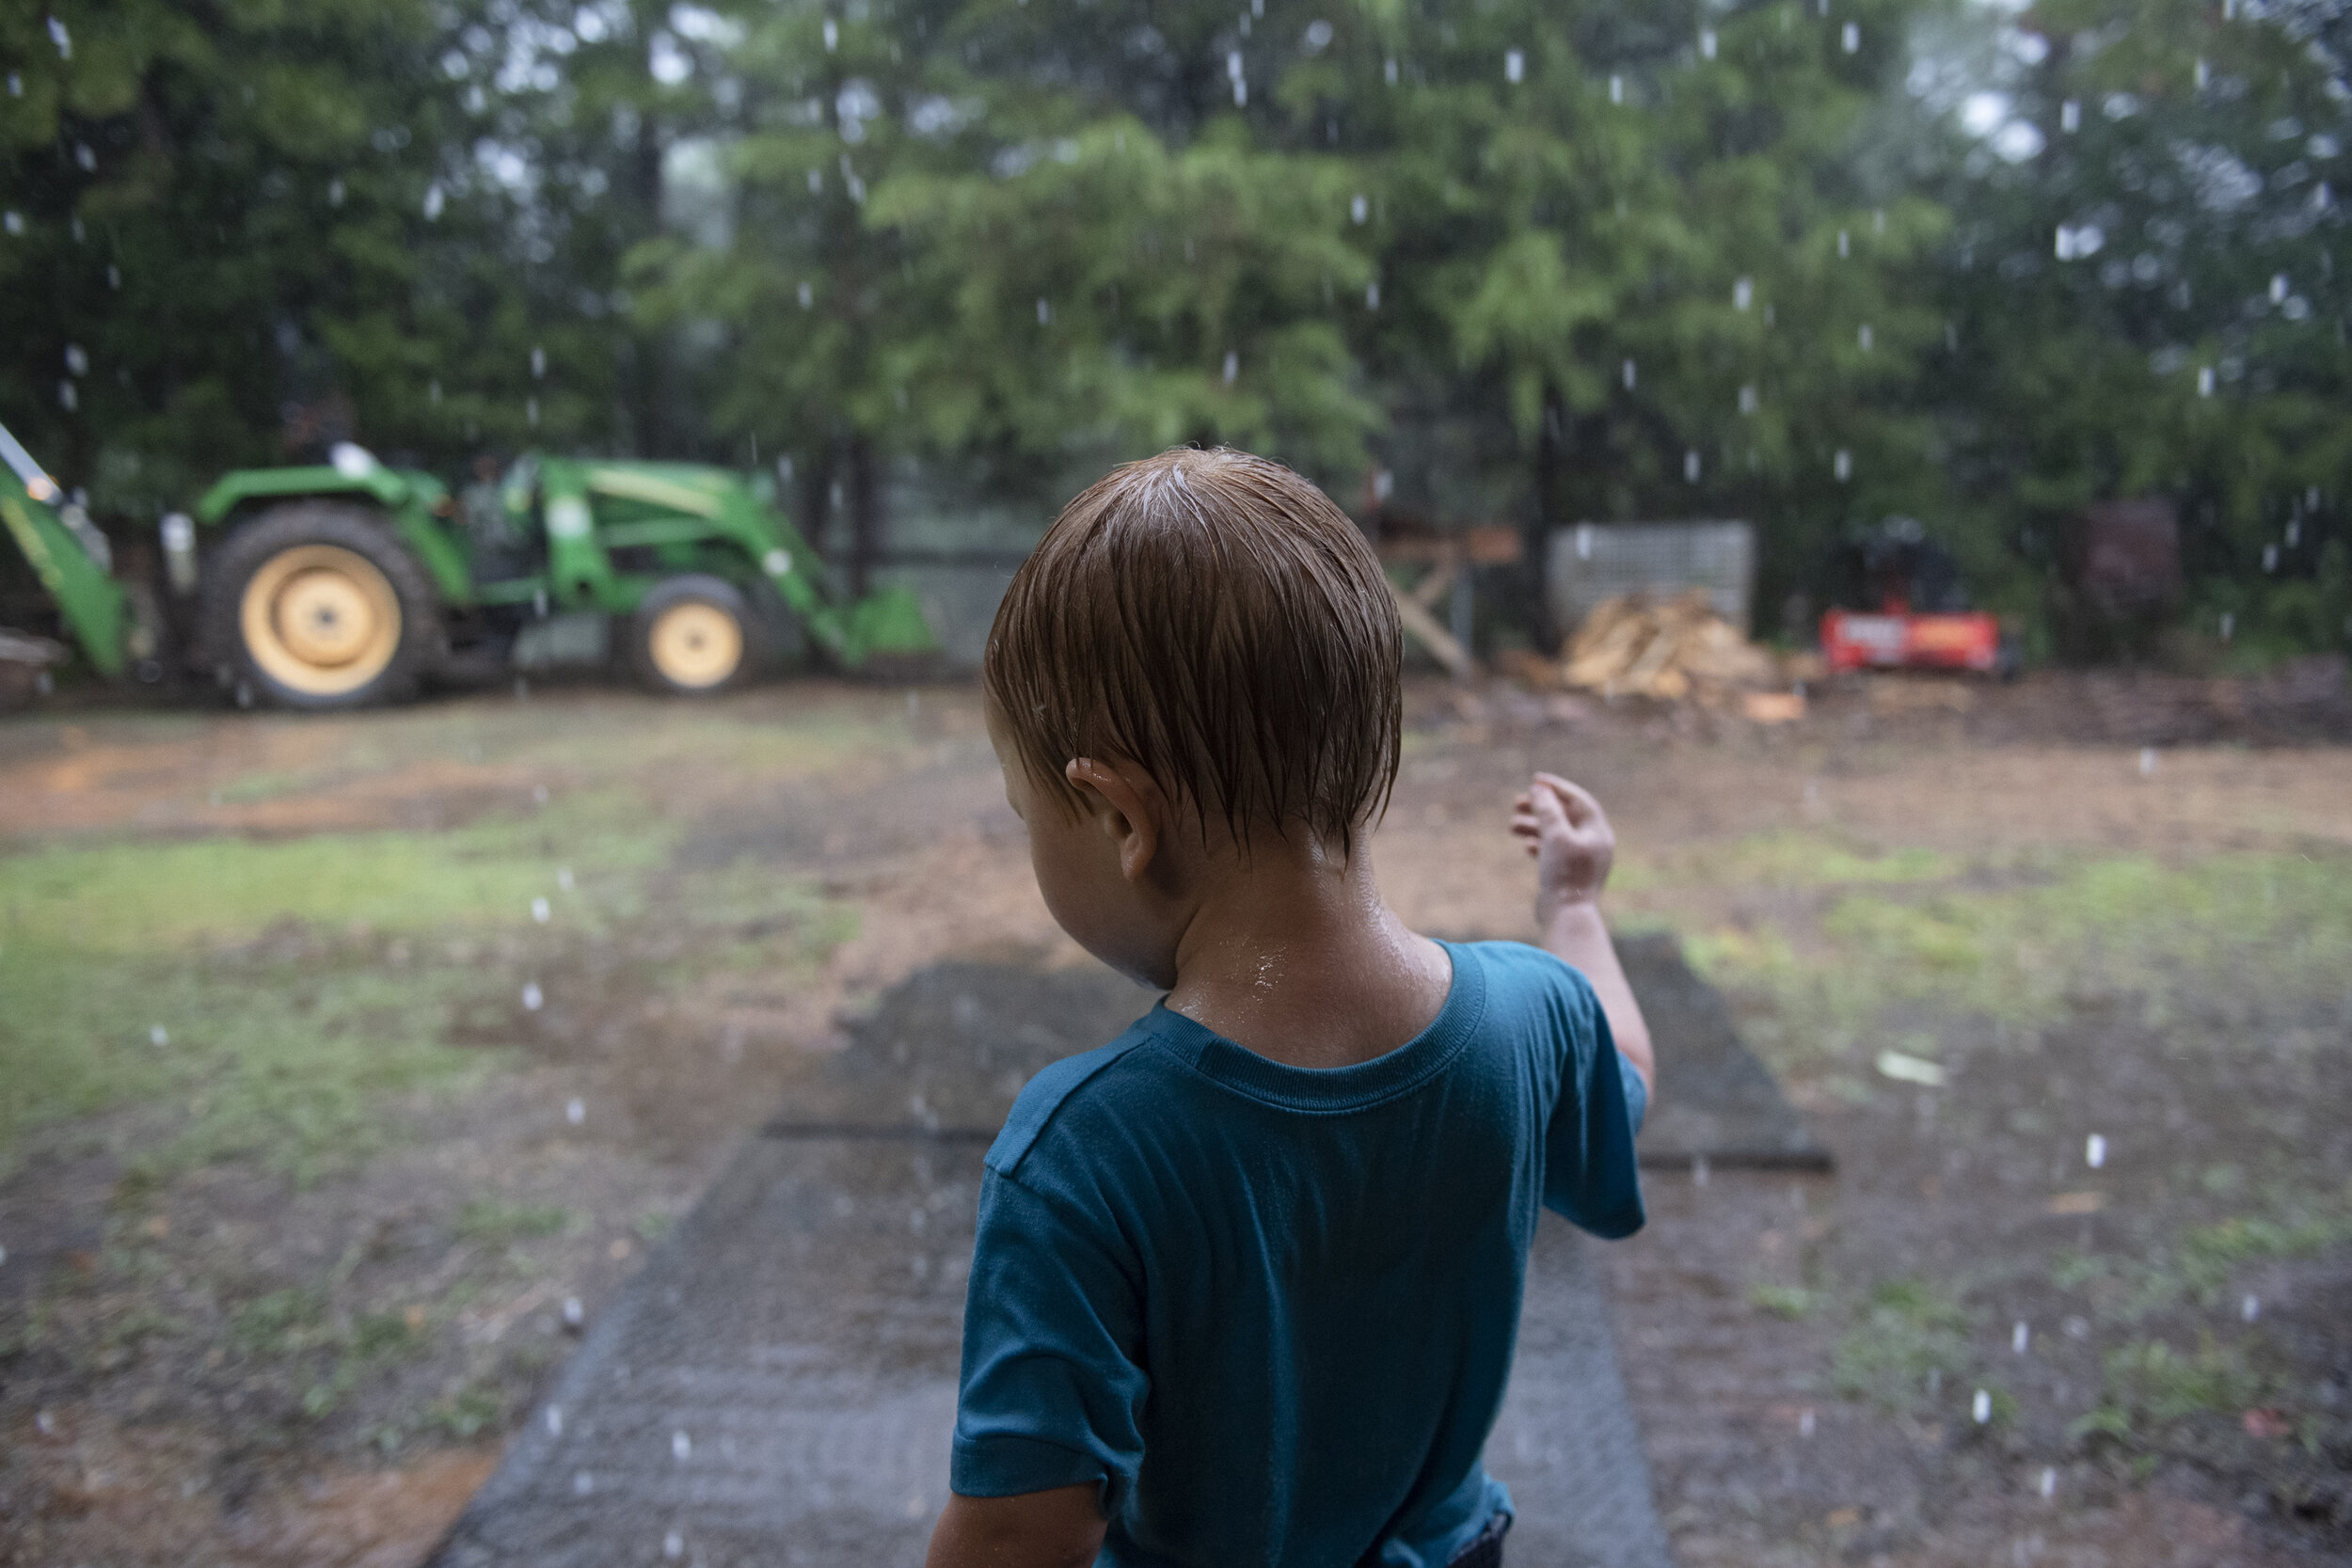  Jace Maddox, 2, watches the rain at Possum Kingdom Kreamery during the 2019 Upstate Farm Tour Saturday, June 8, 2019. Maddox was there with his family volunteering at the event. (The Greenville News) 